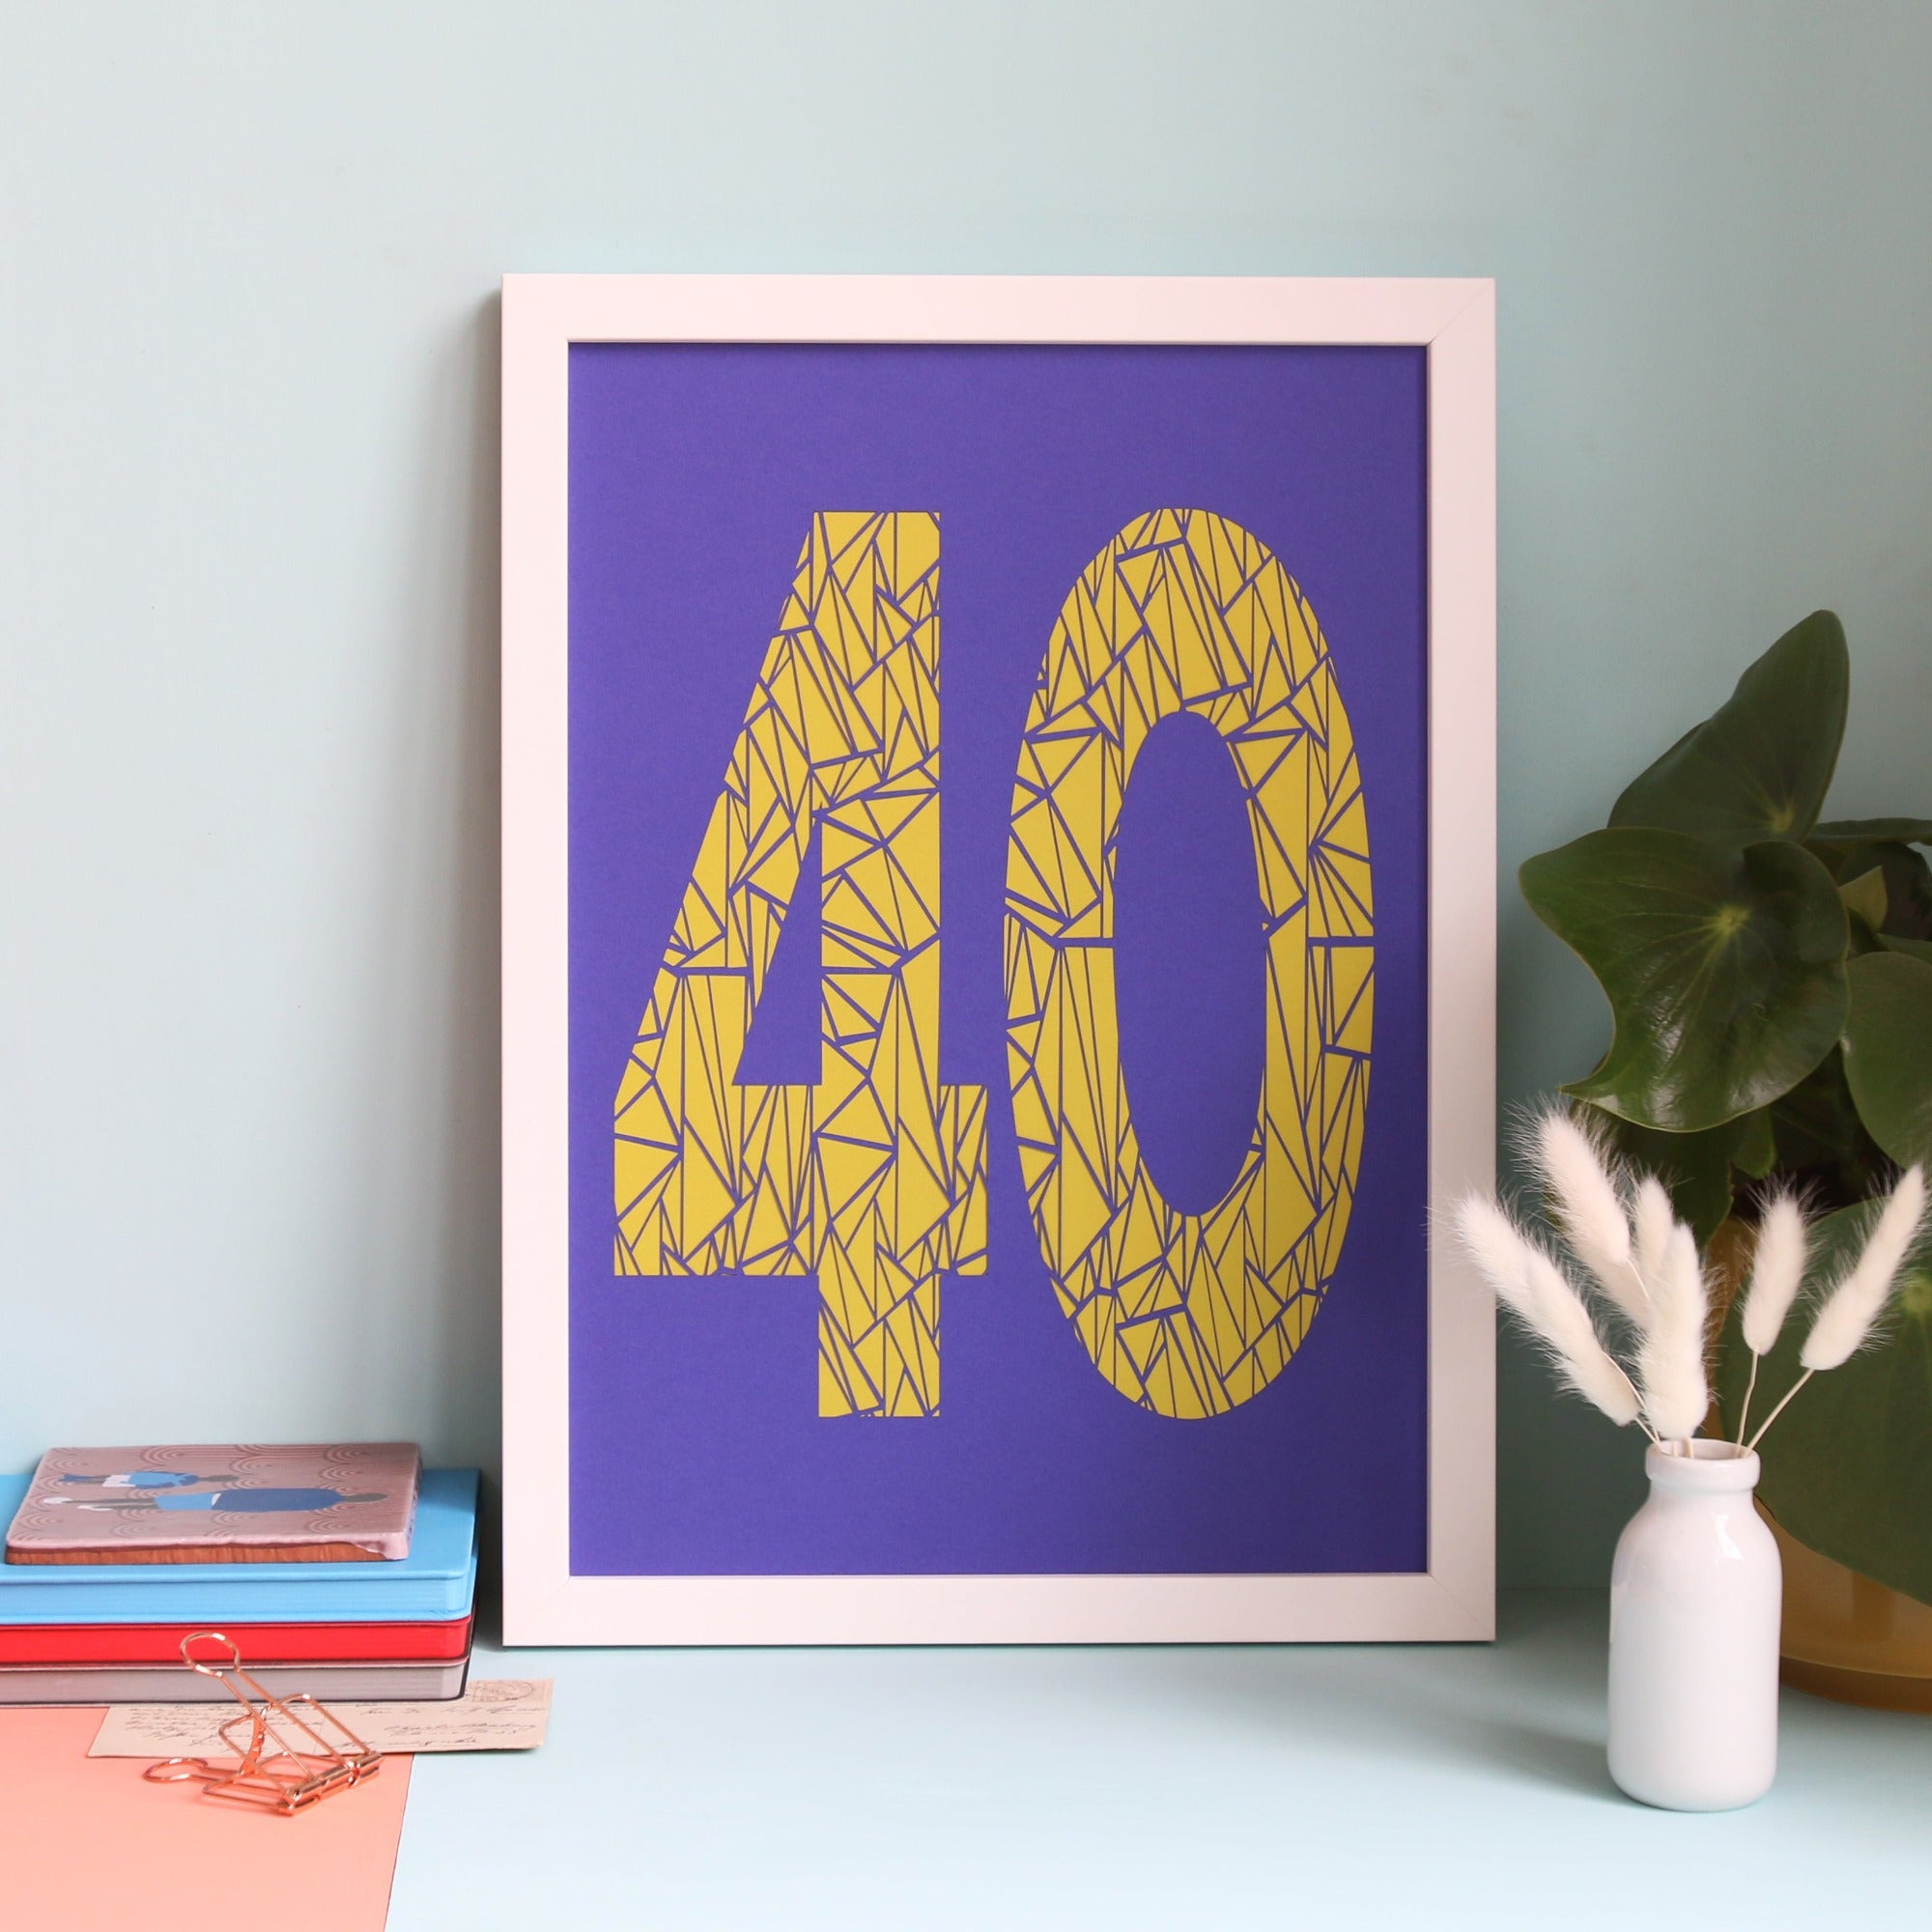 Framed geometric number 40 papercut in purple and yellow colourways